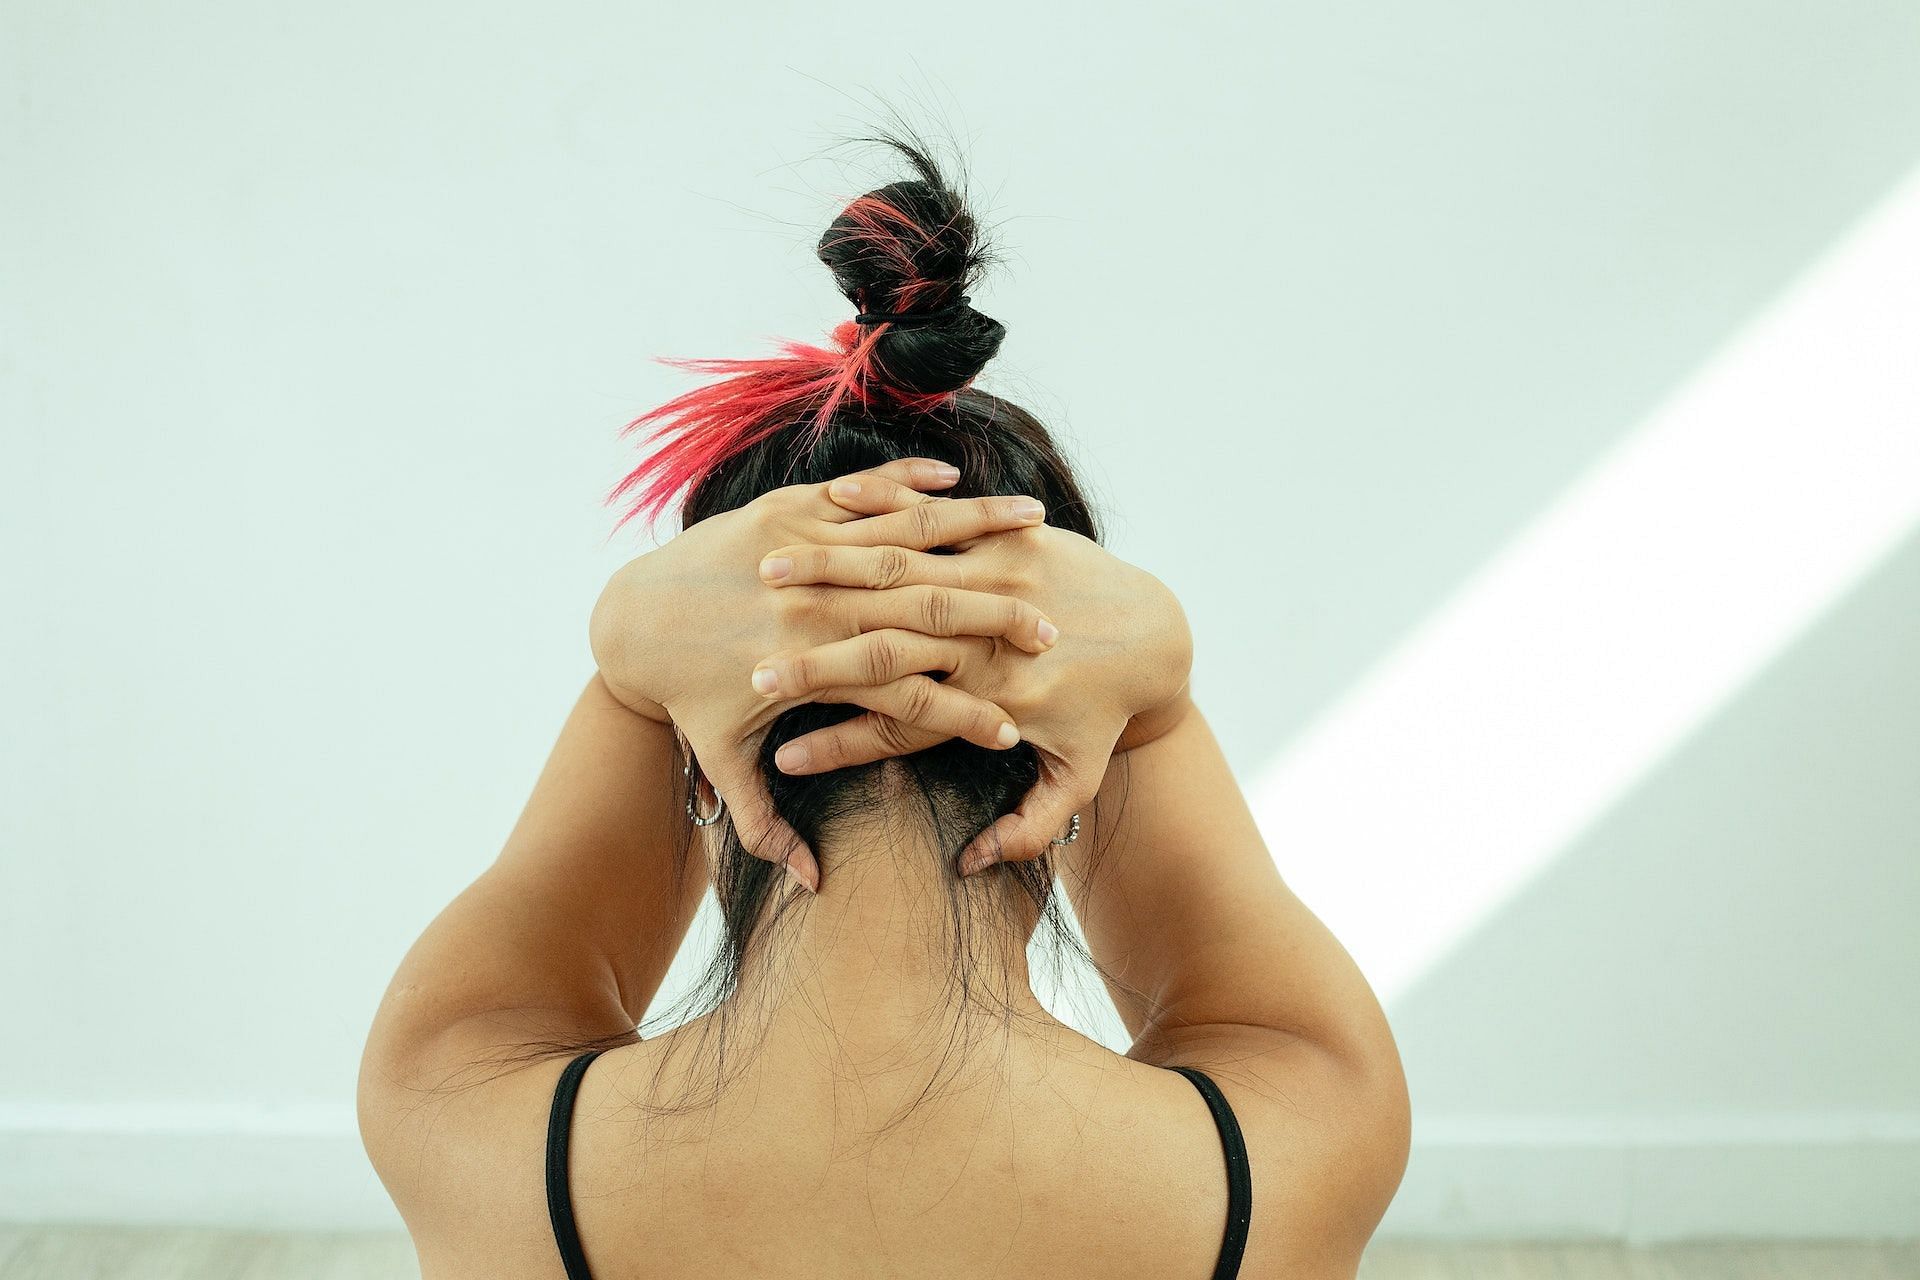 The chin tuck exercise eases neck pain and stiffness. (Photo via Pexels/Miriam Alonso)